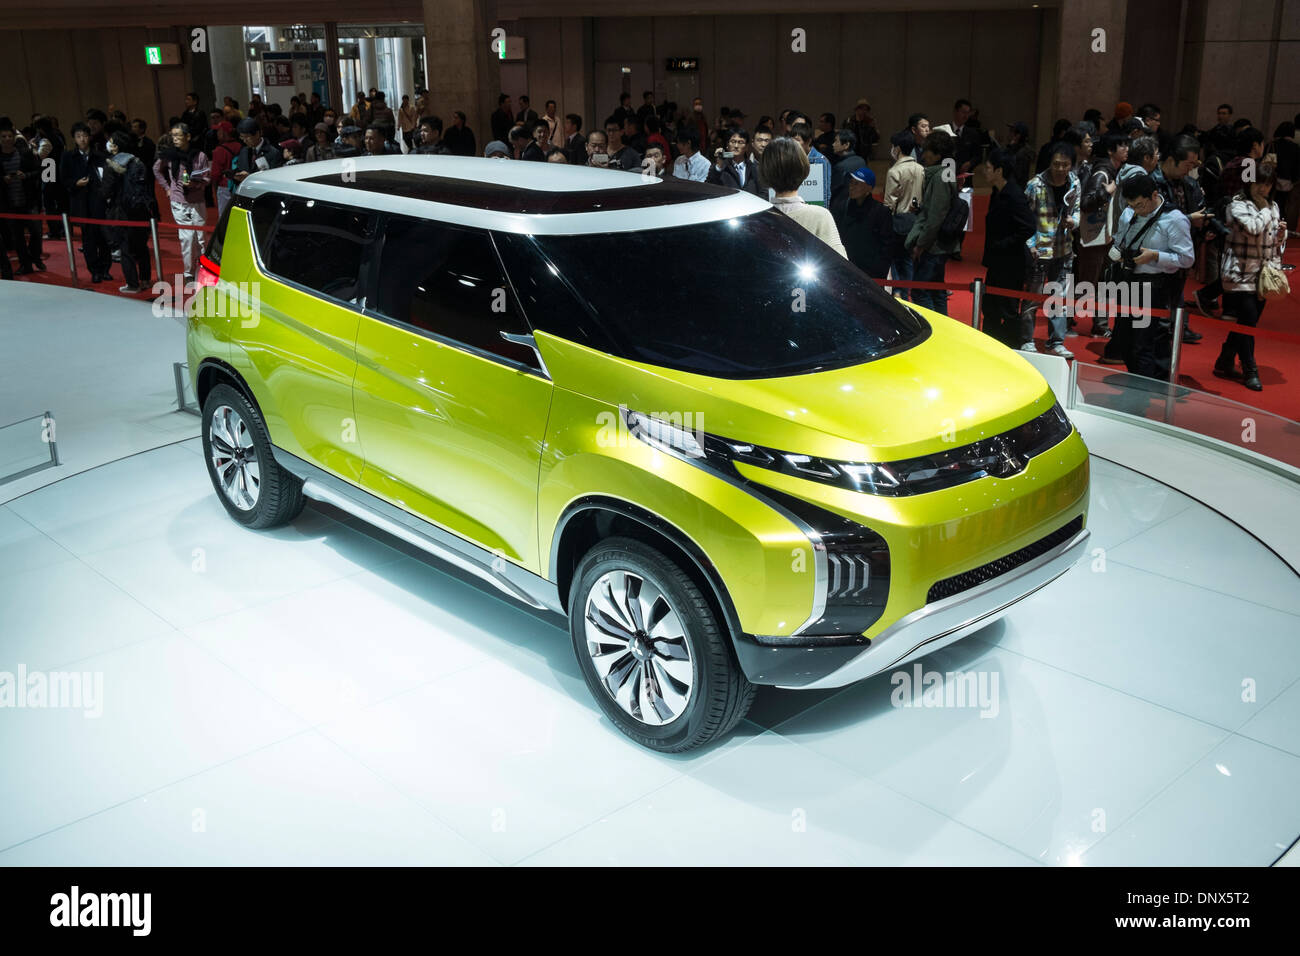 Mitsubishi AR concept hybrid electric car at Tokyo Motor Show 2013 in Japan Stock Photo